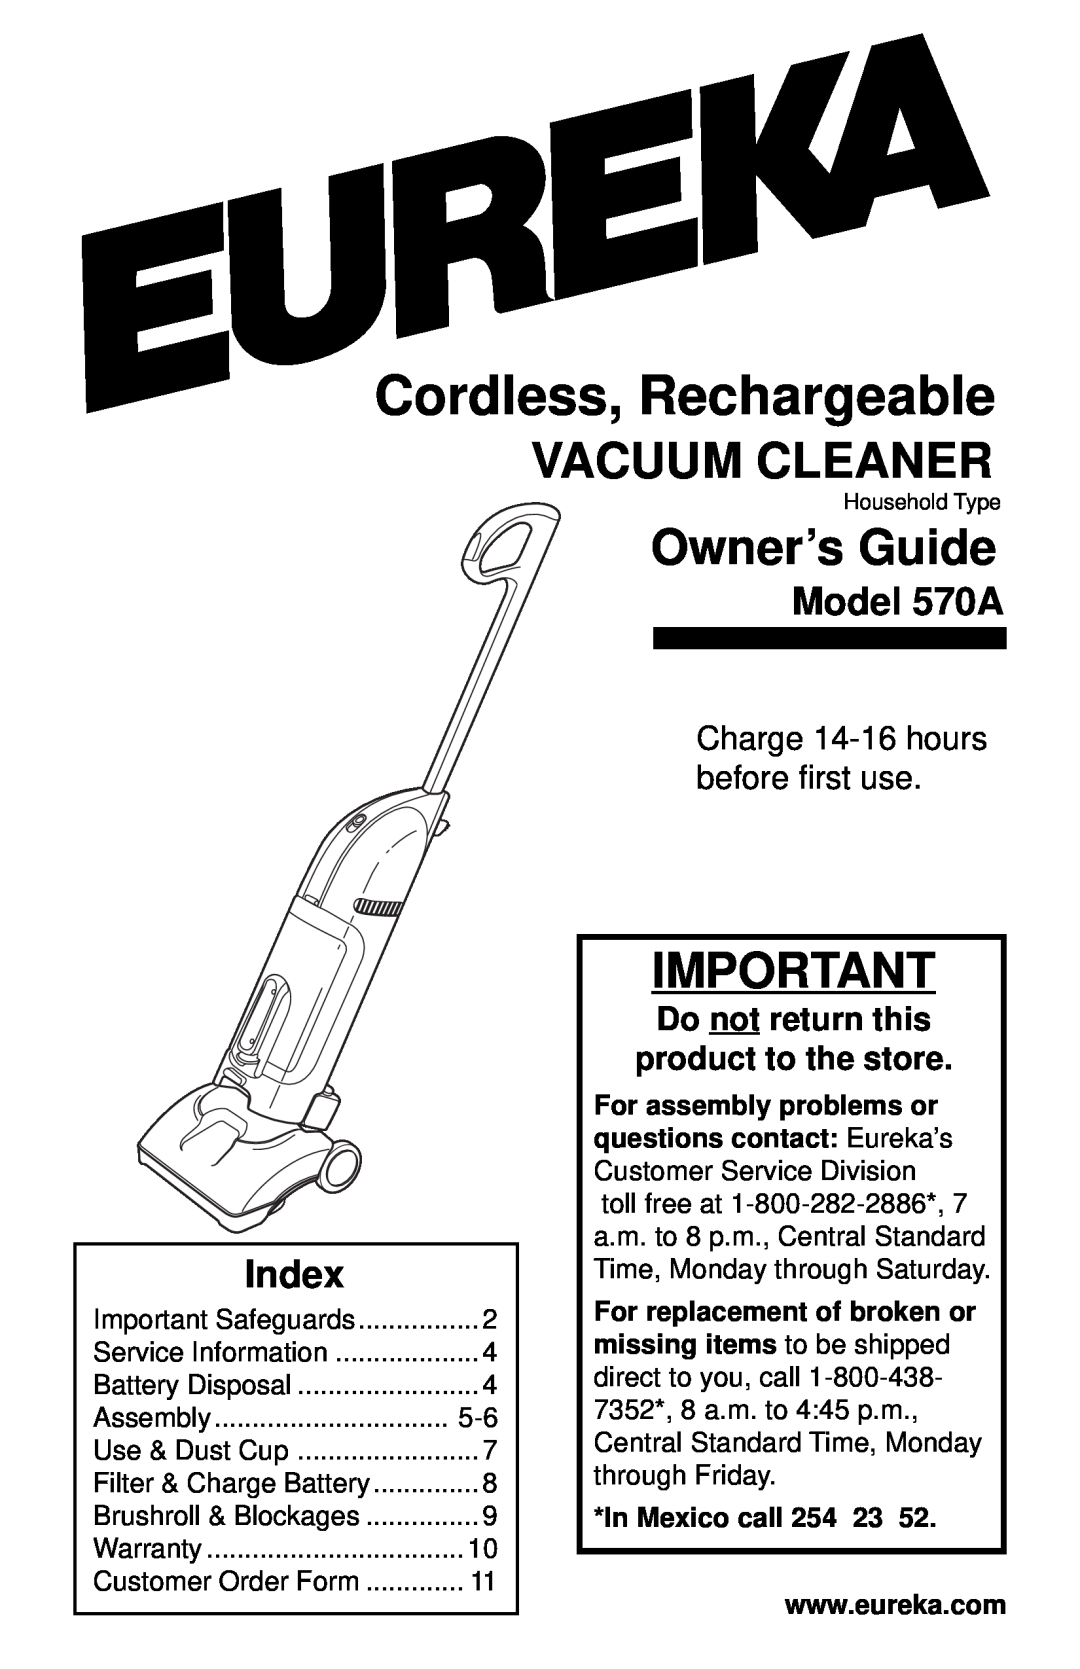 Eureka warranty Vacuum Cleaner, Owner’s Guide, Index, Model 570A, Do not return this product to the store 